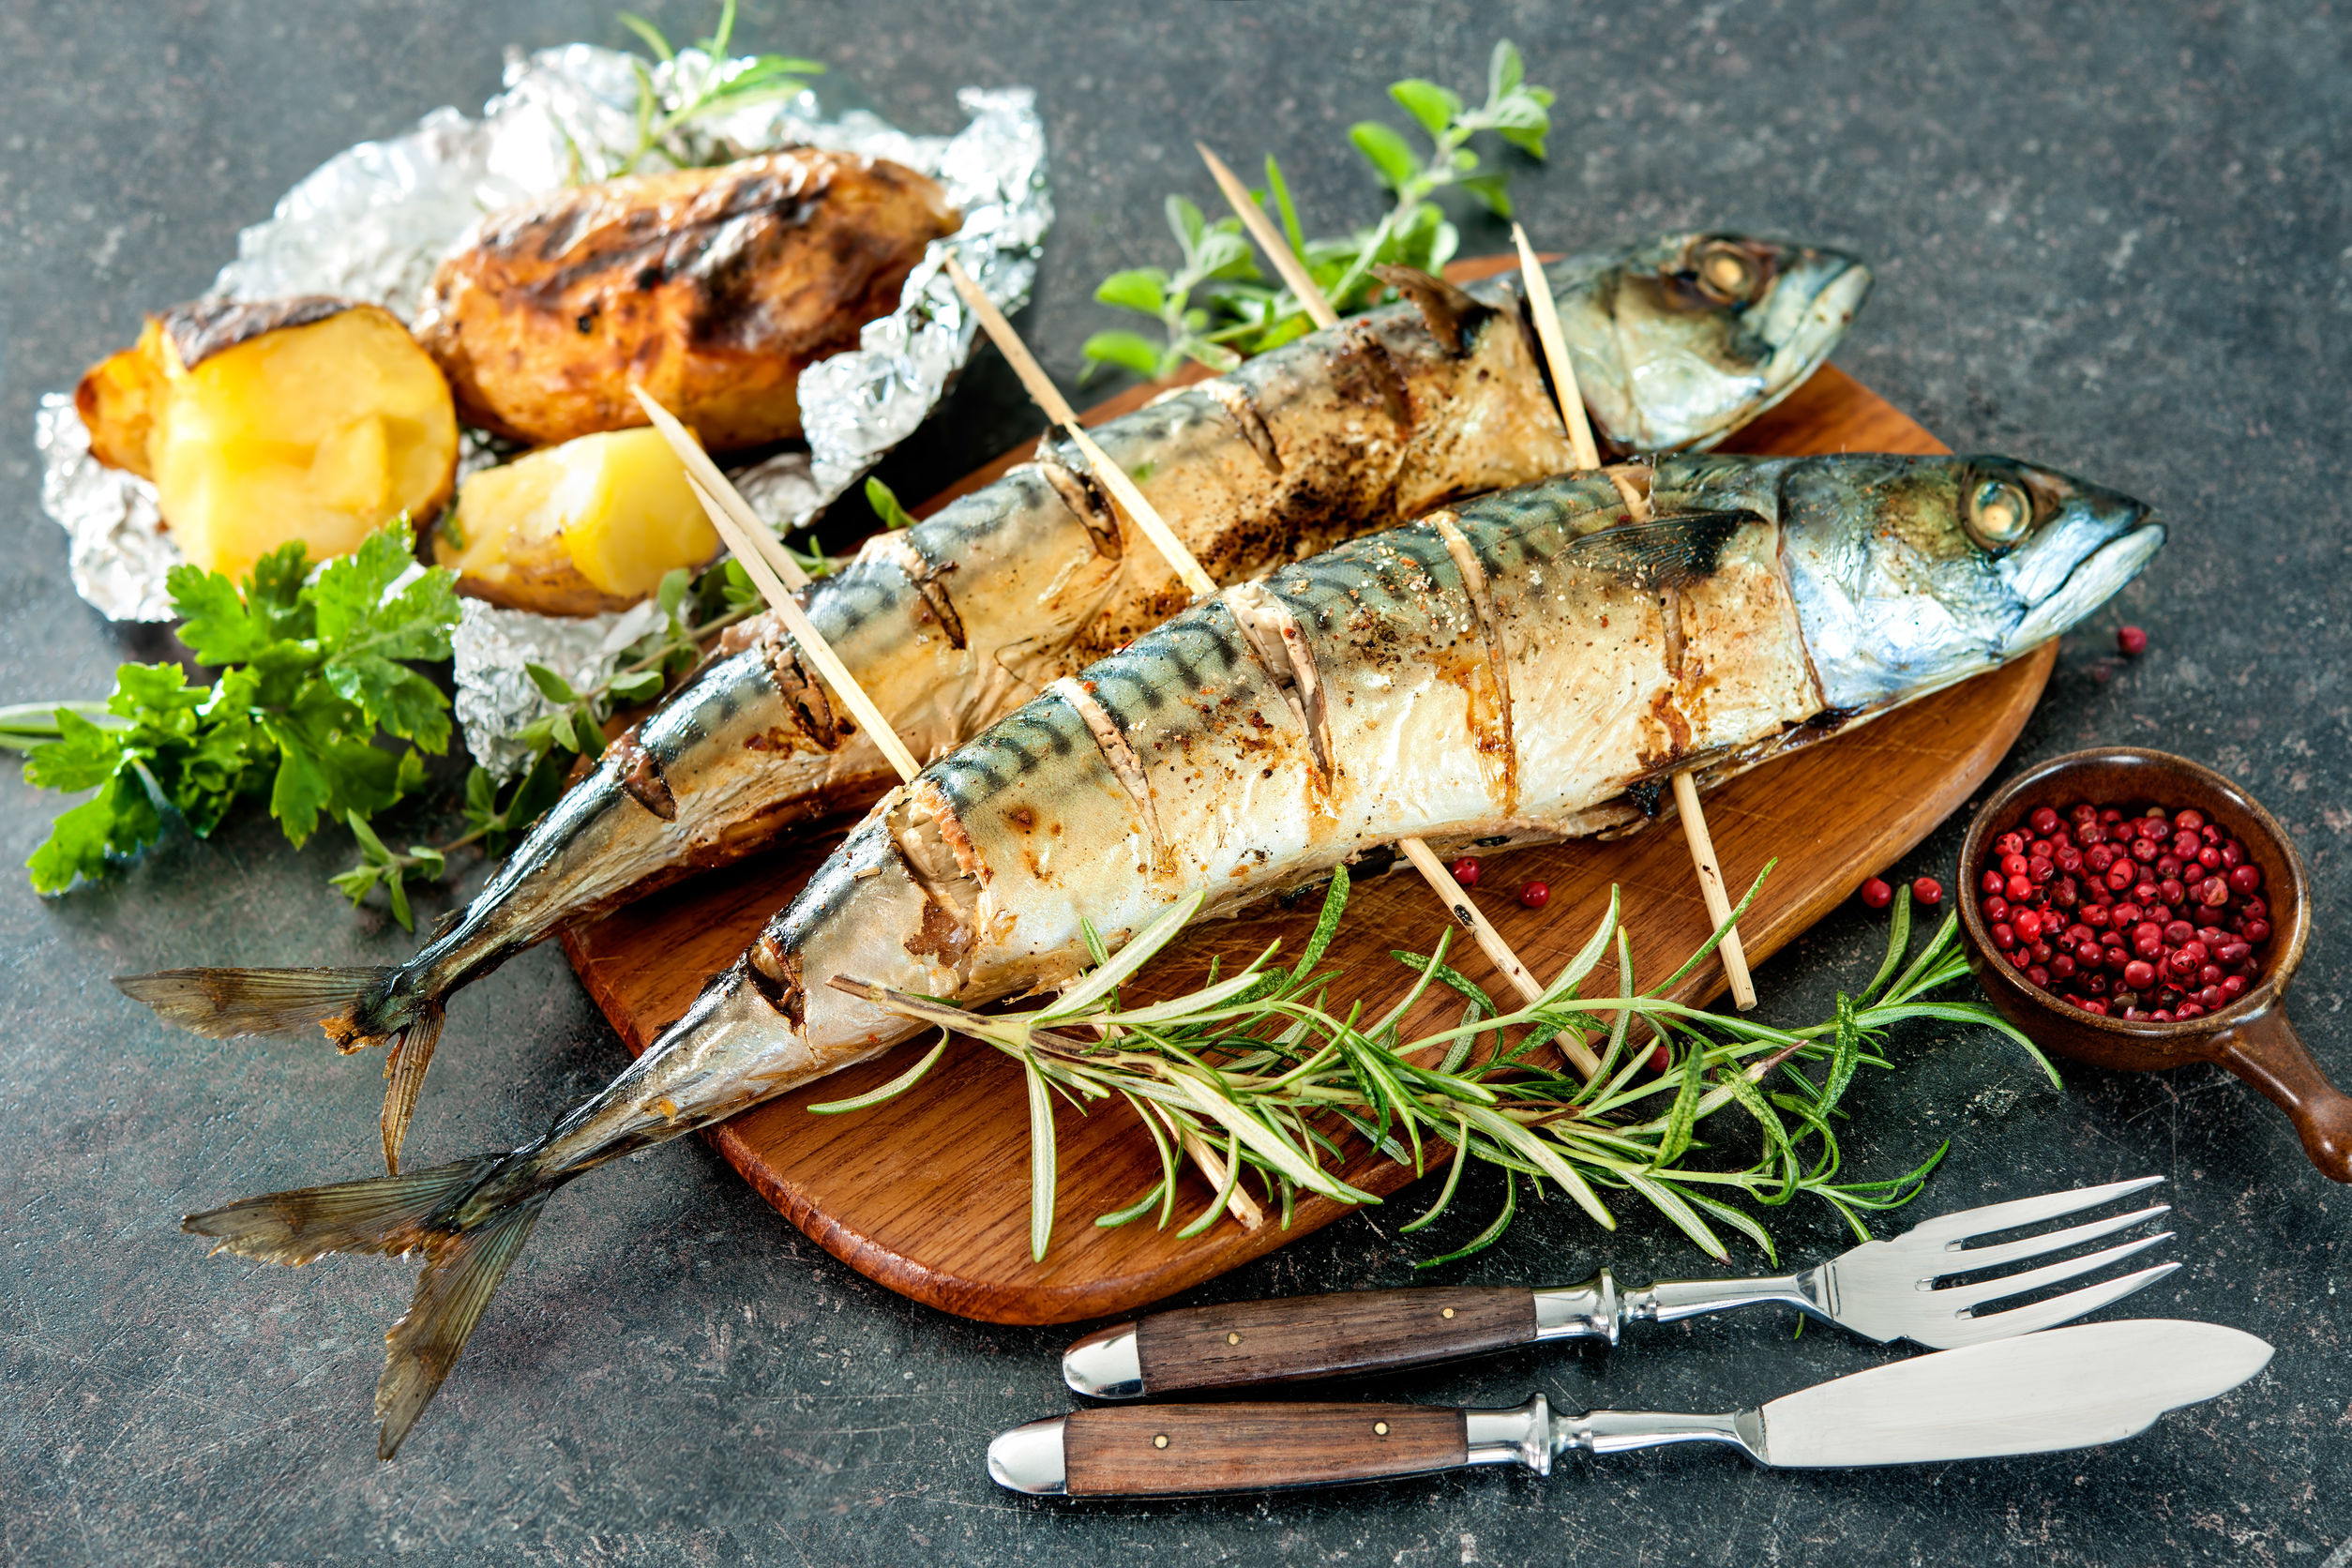 Culture of Sea Food and Its Popularity